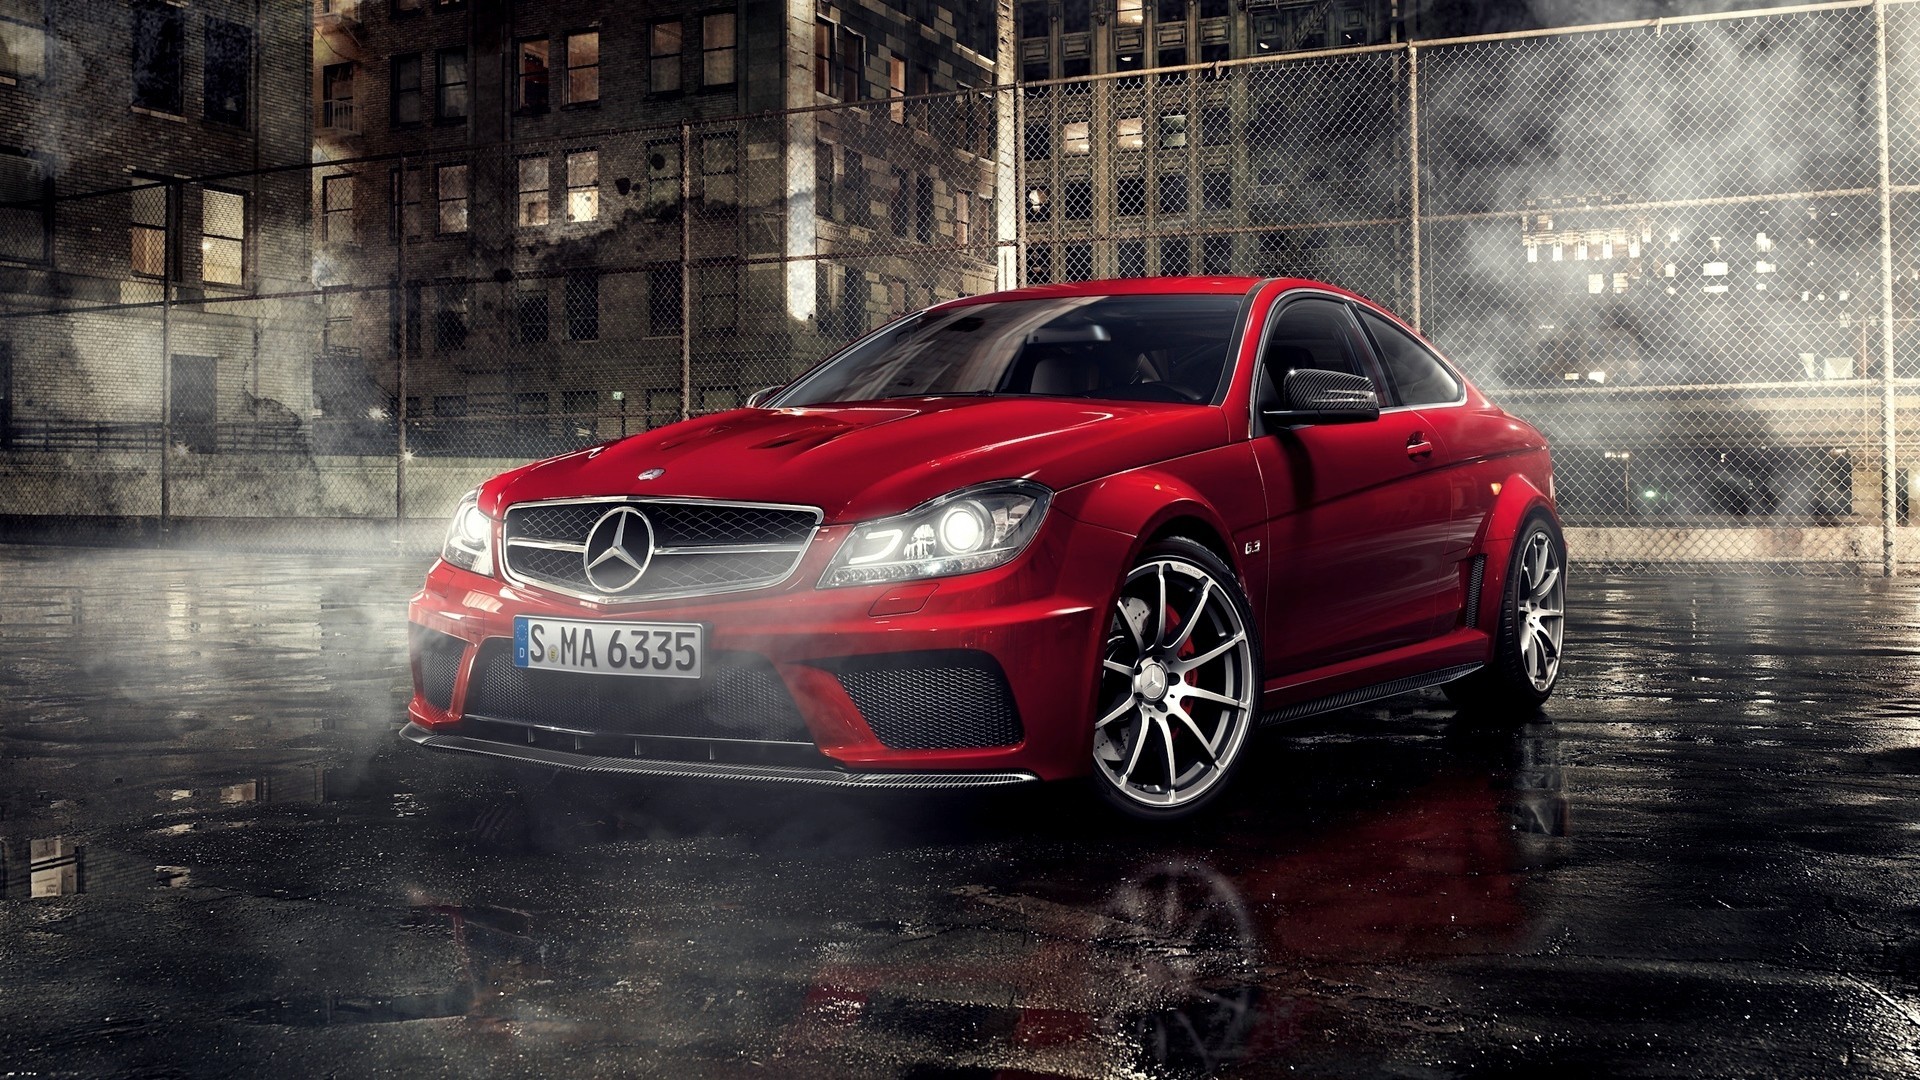 General 1920x1080 Mercedes-Benz car numbers vehicle red cars